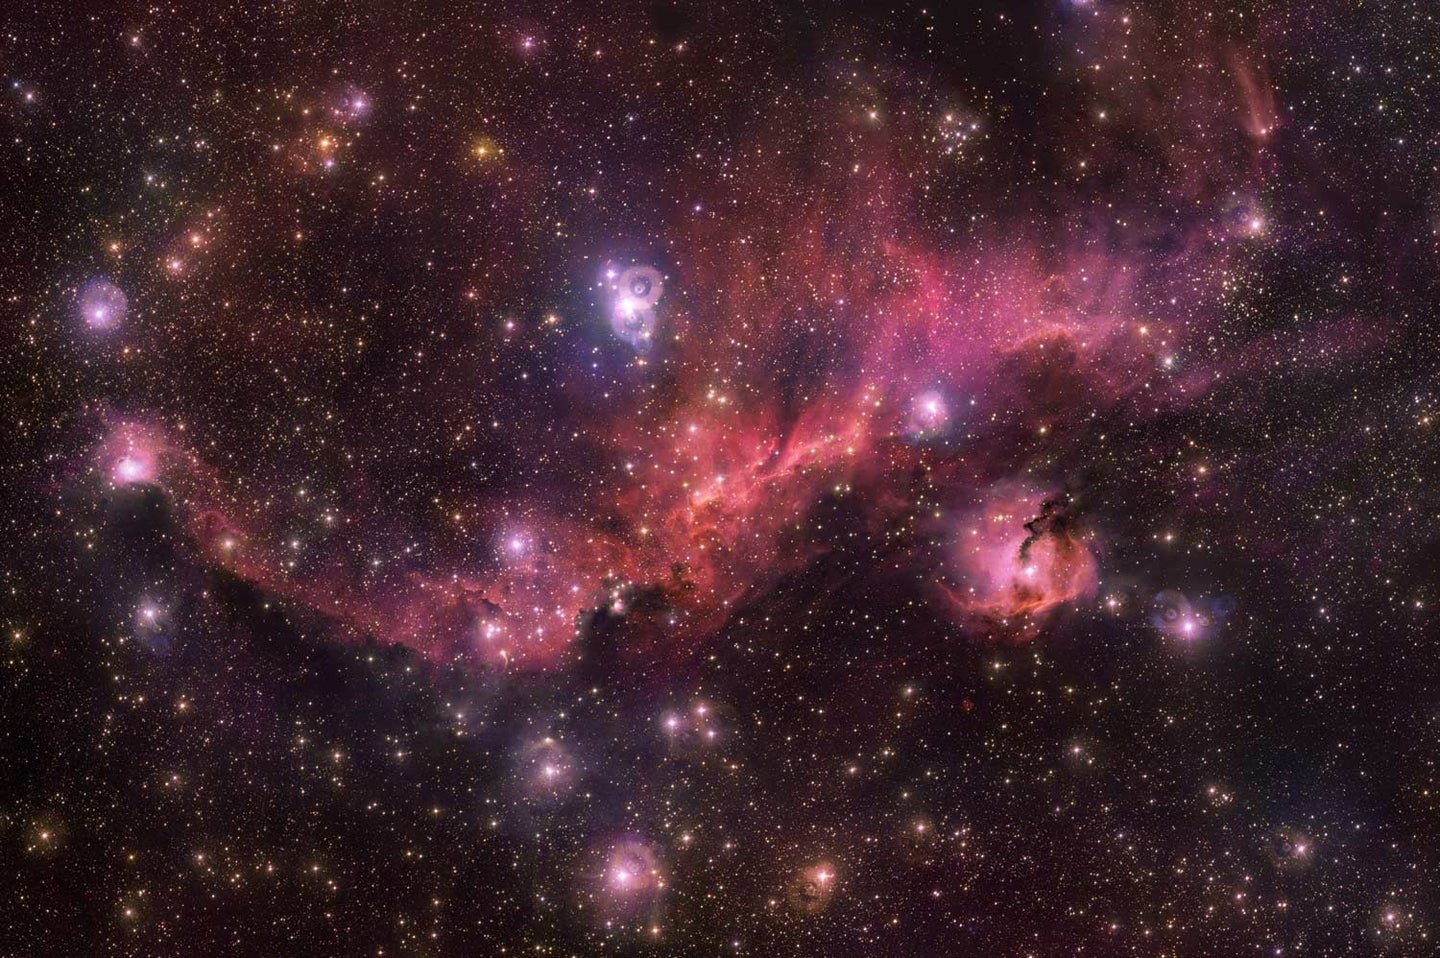 This seagull-shaped nebula is a hangout for baby stars